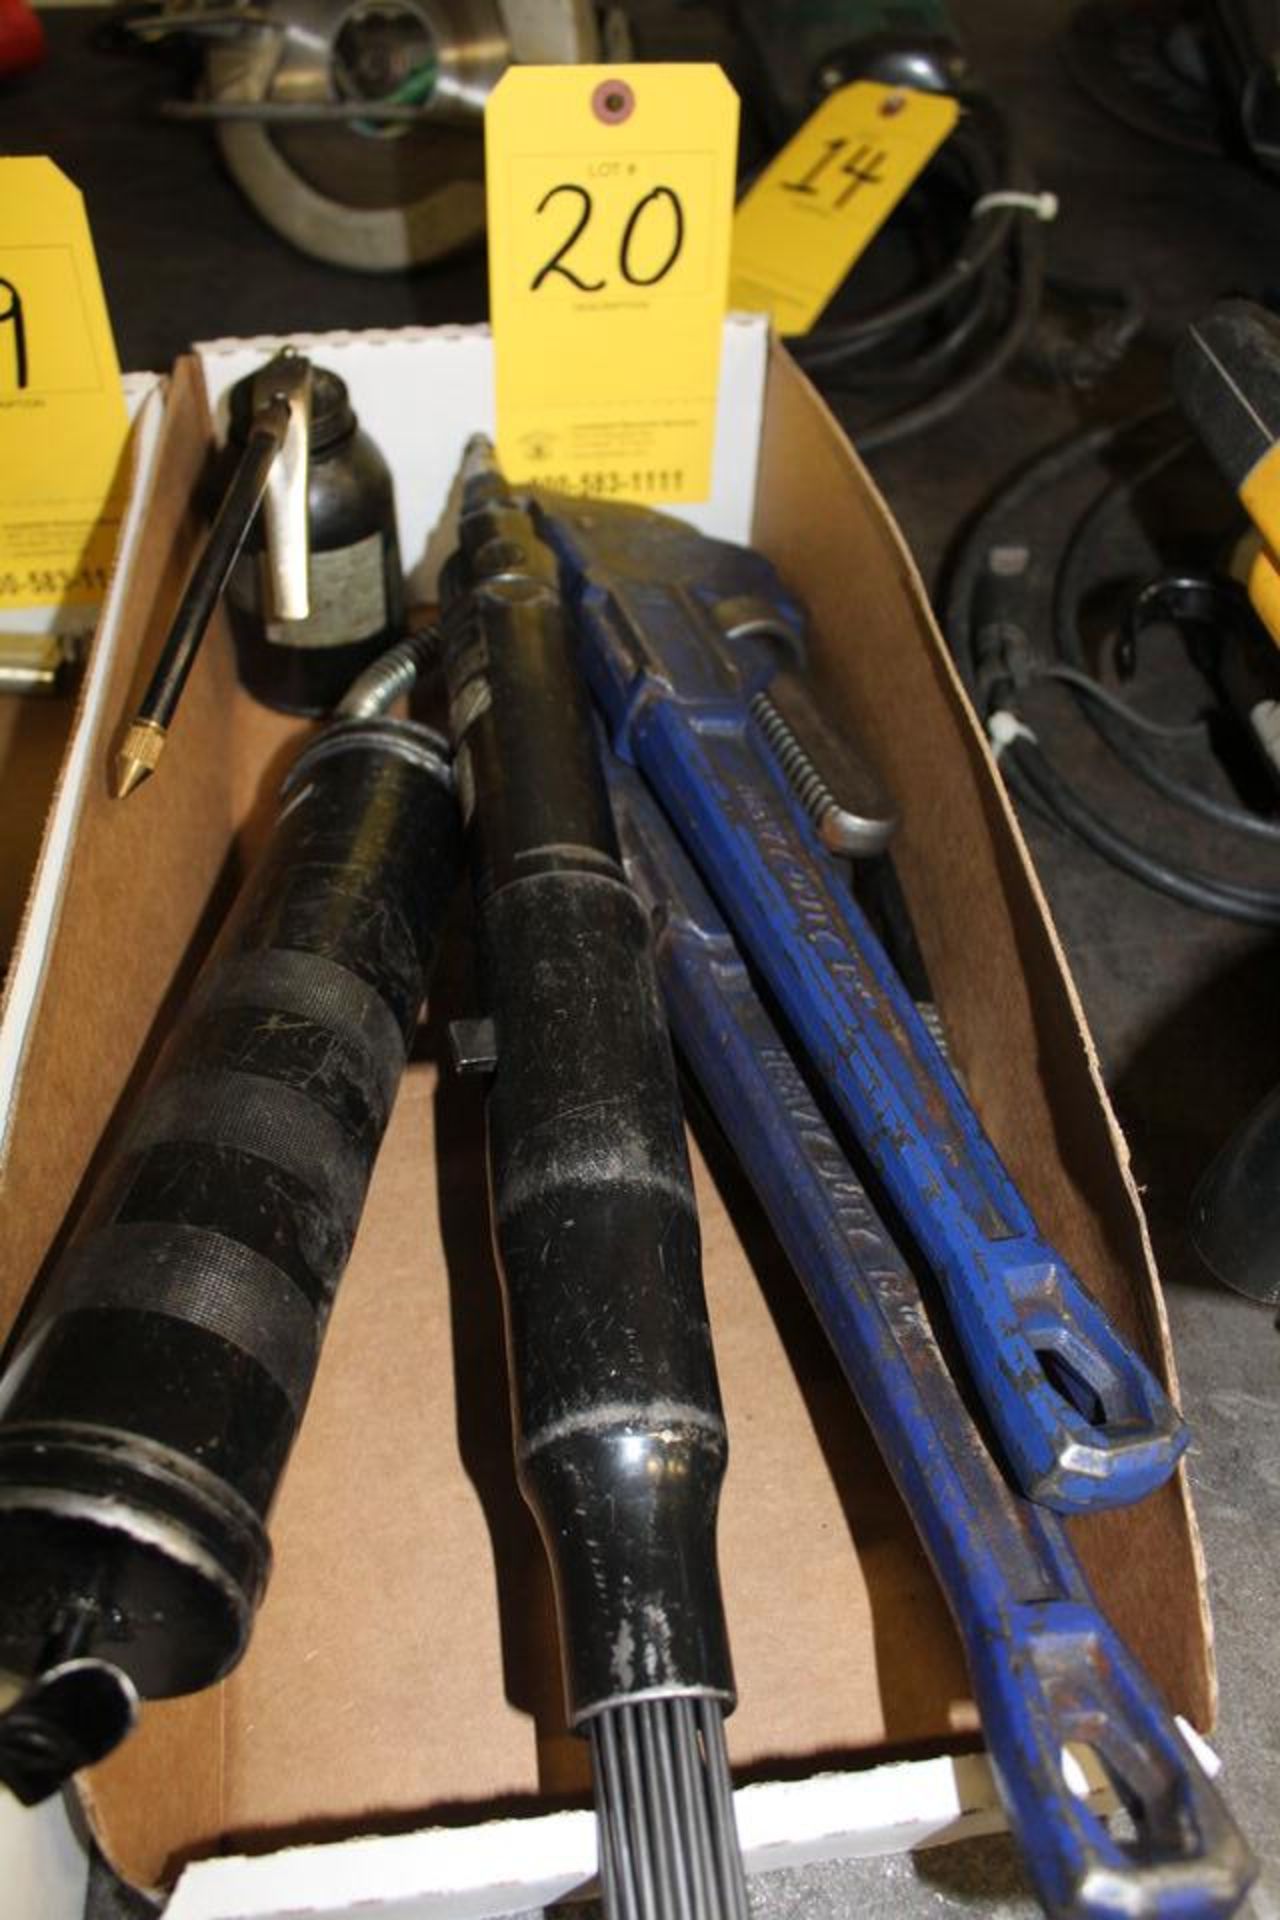 CONT OF BOX: GREASE GUN, SEALER, PIPE WRENCHES